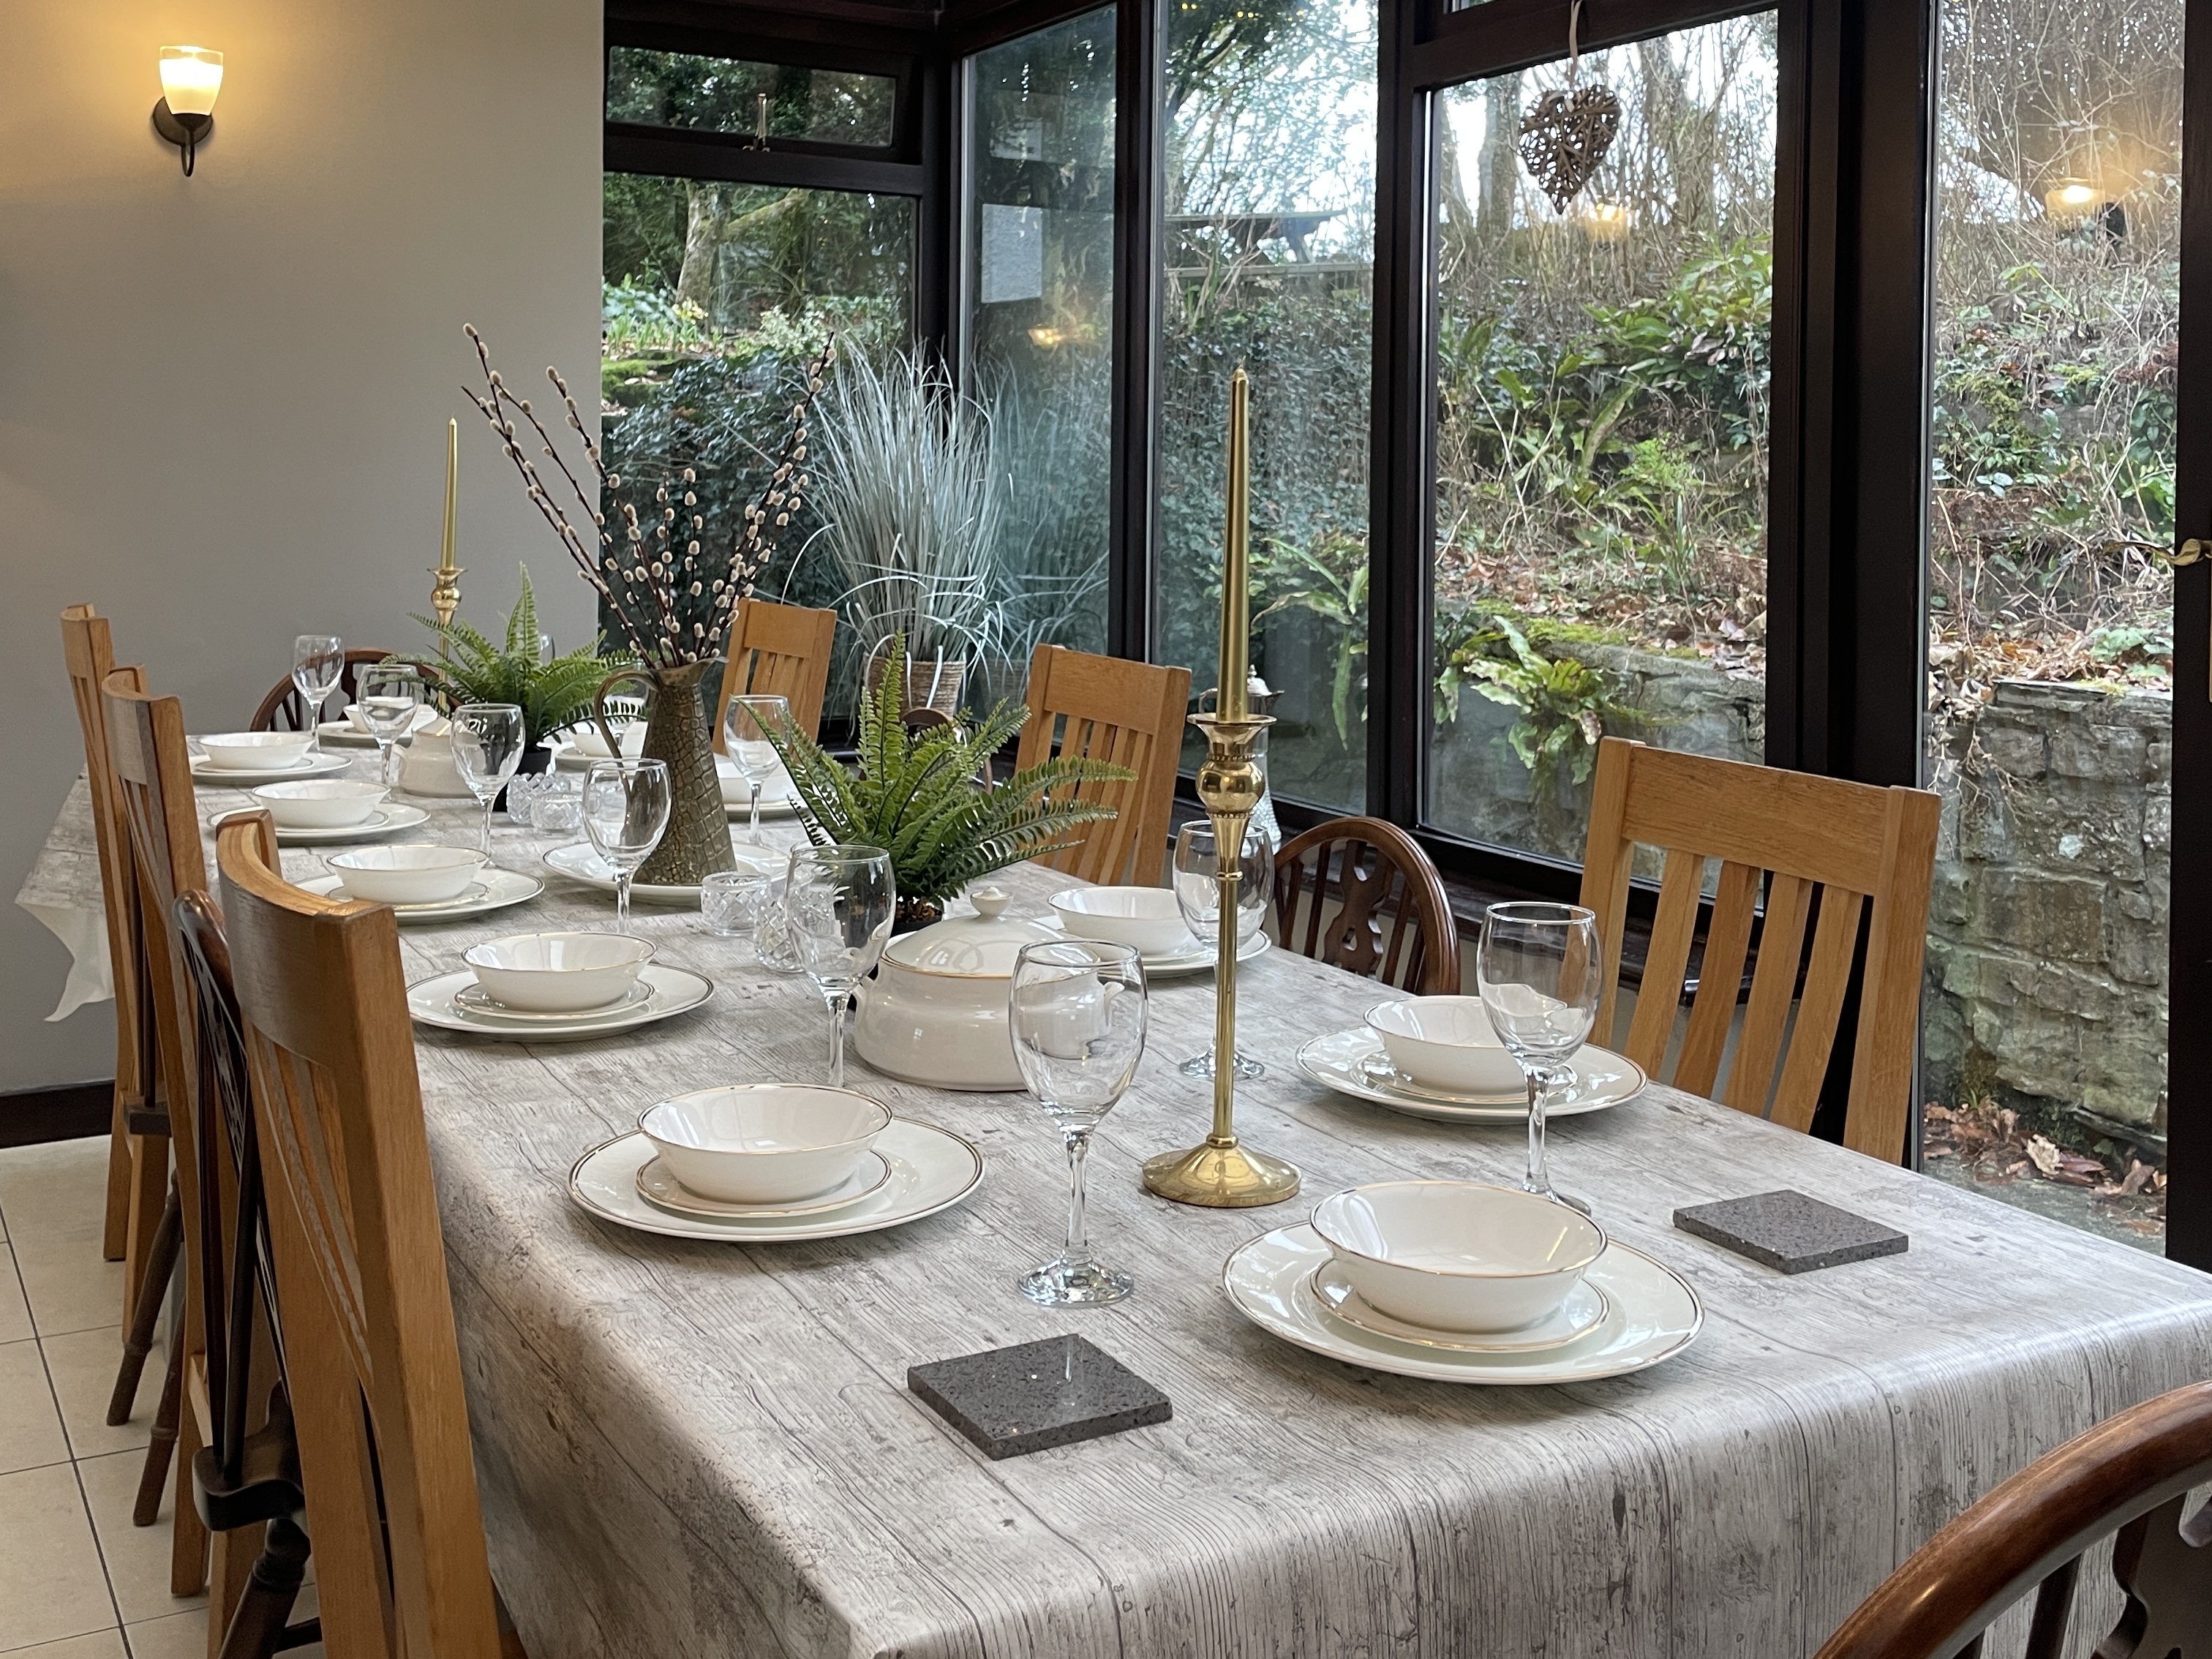 Lake Villa Holiday Cottages - Farmhouse dining room